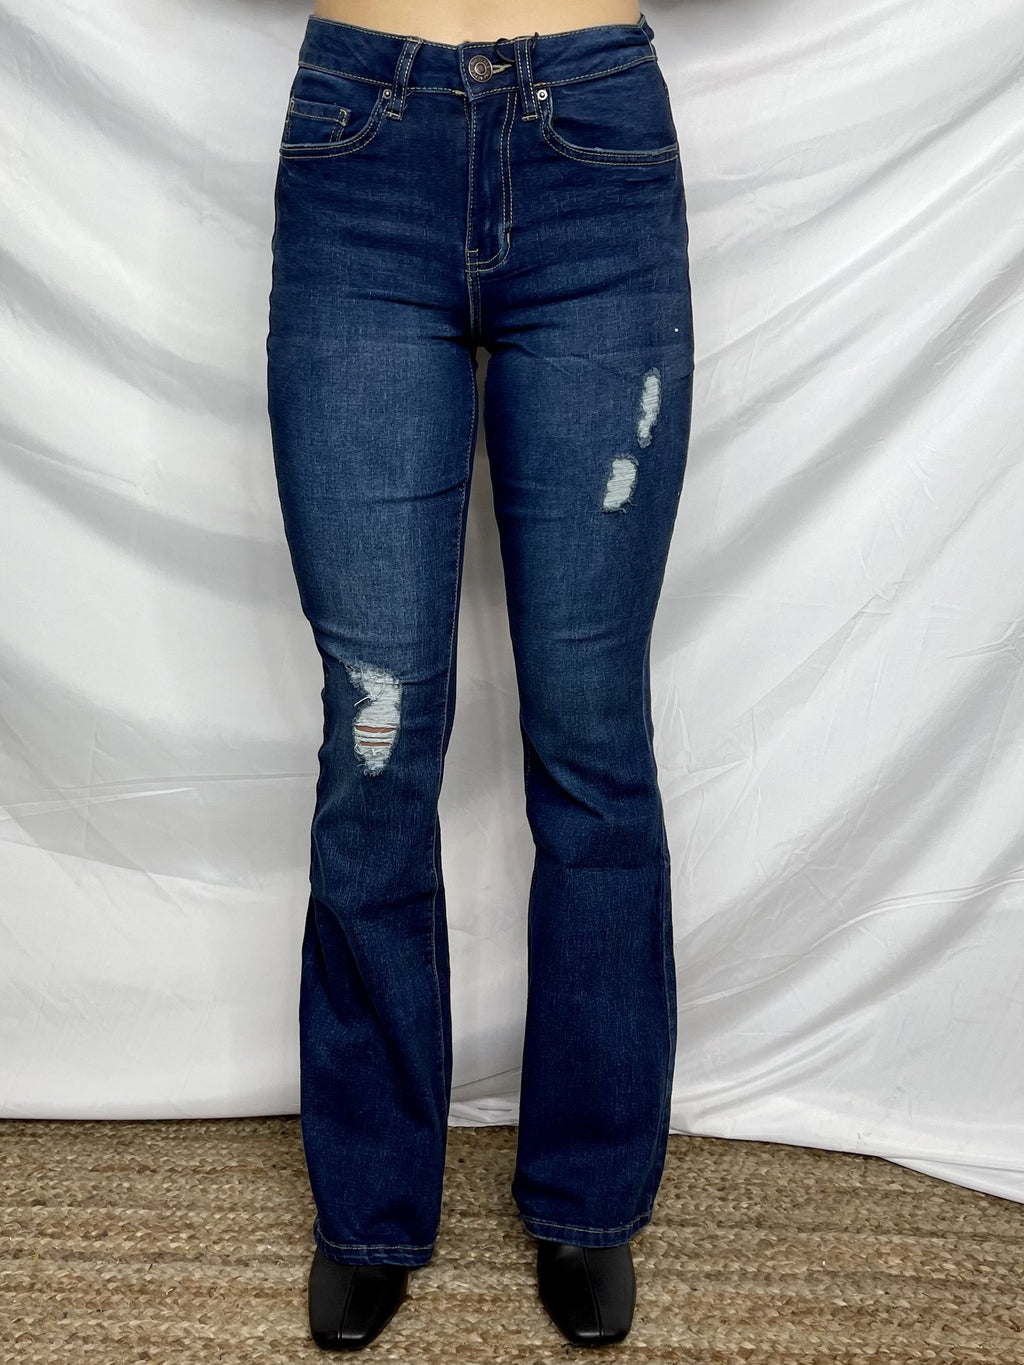 Just Say Yes Flare Jeans- 32" Inseam